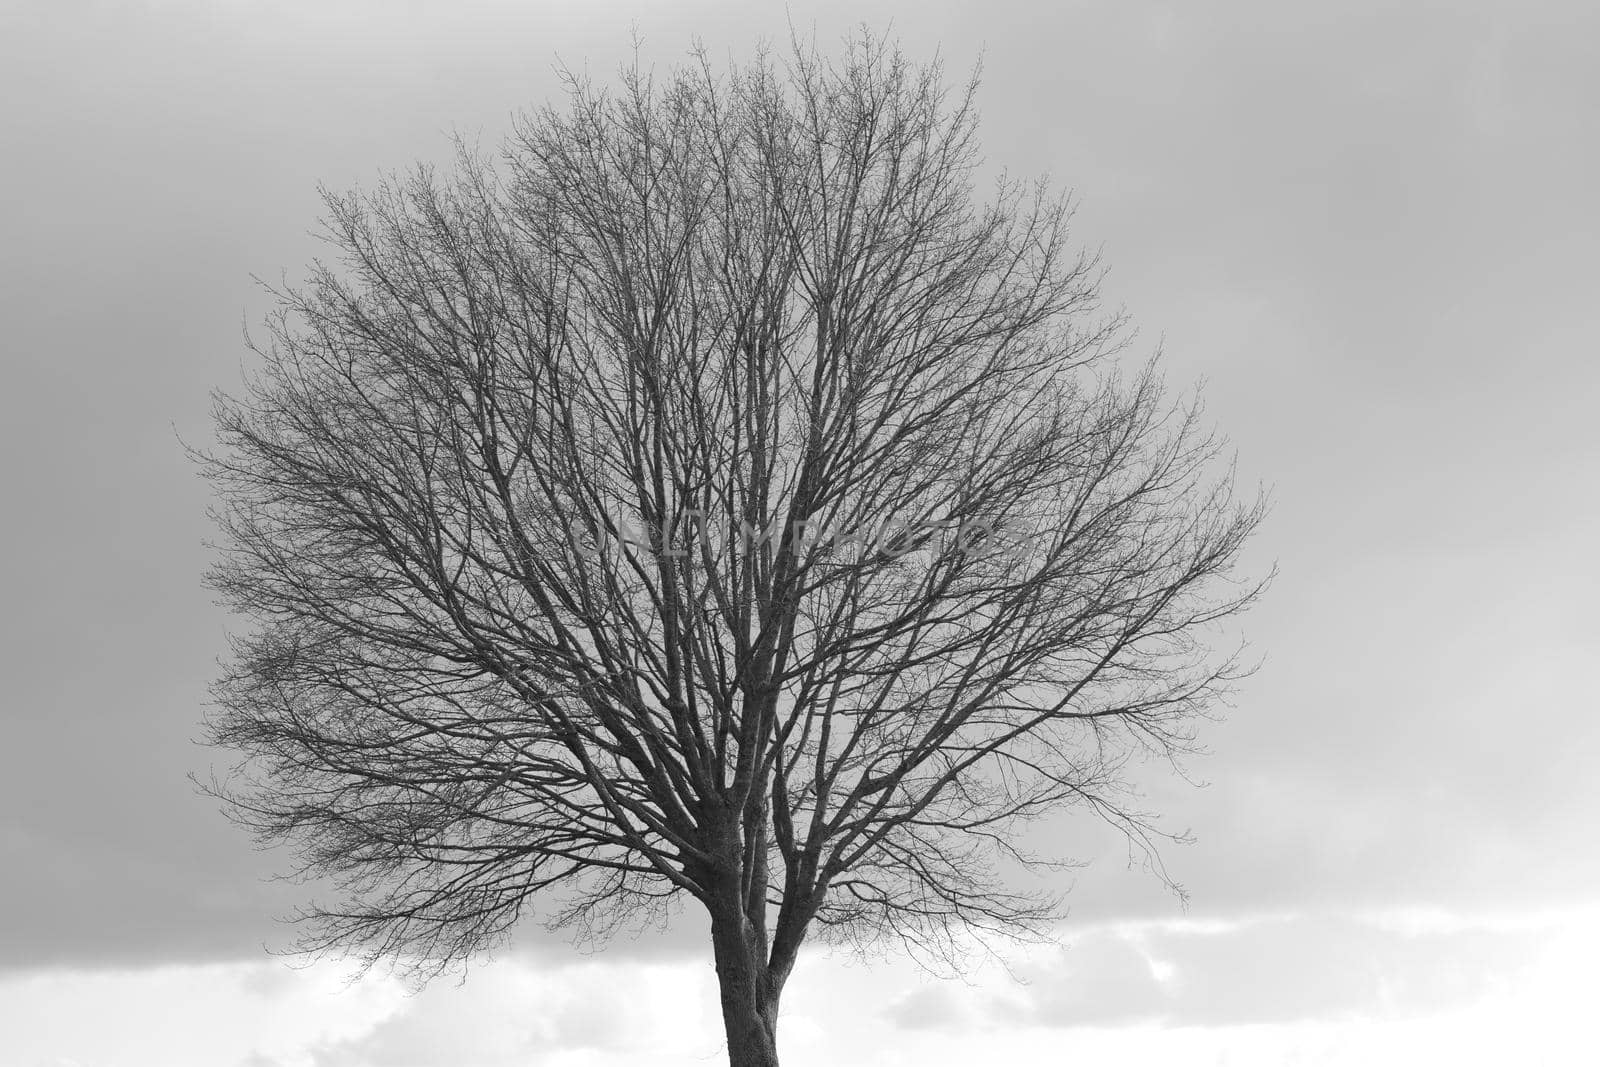 Treetop without leaves against a grey sky by Luise123